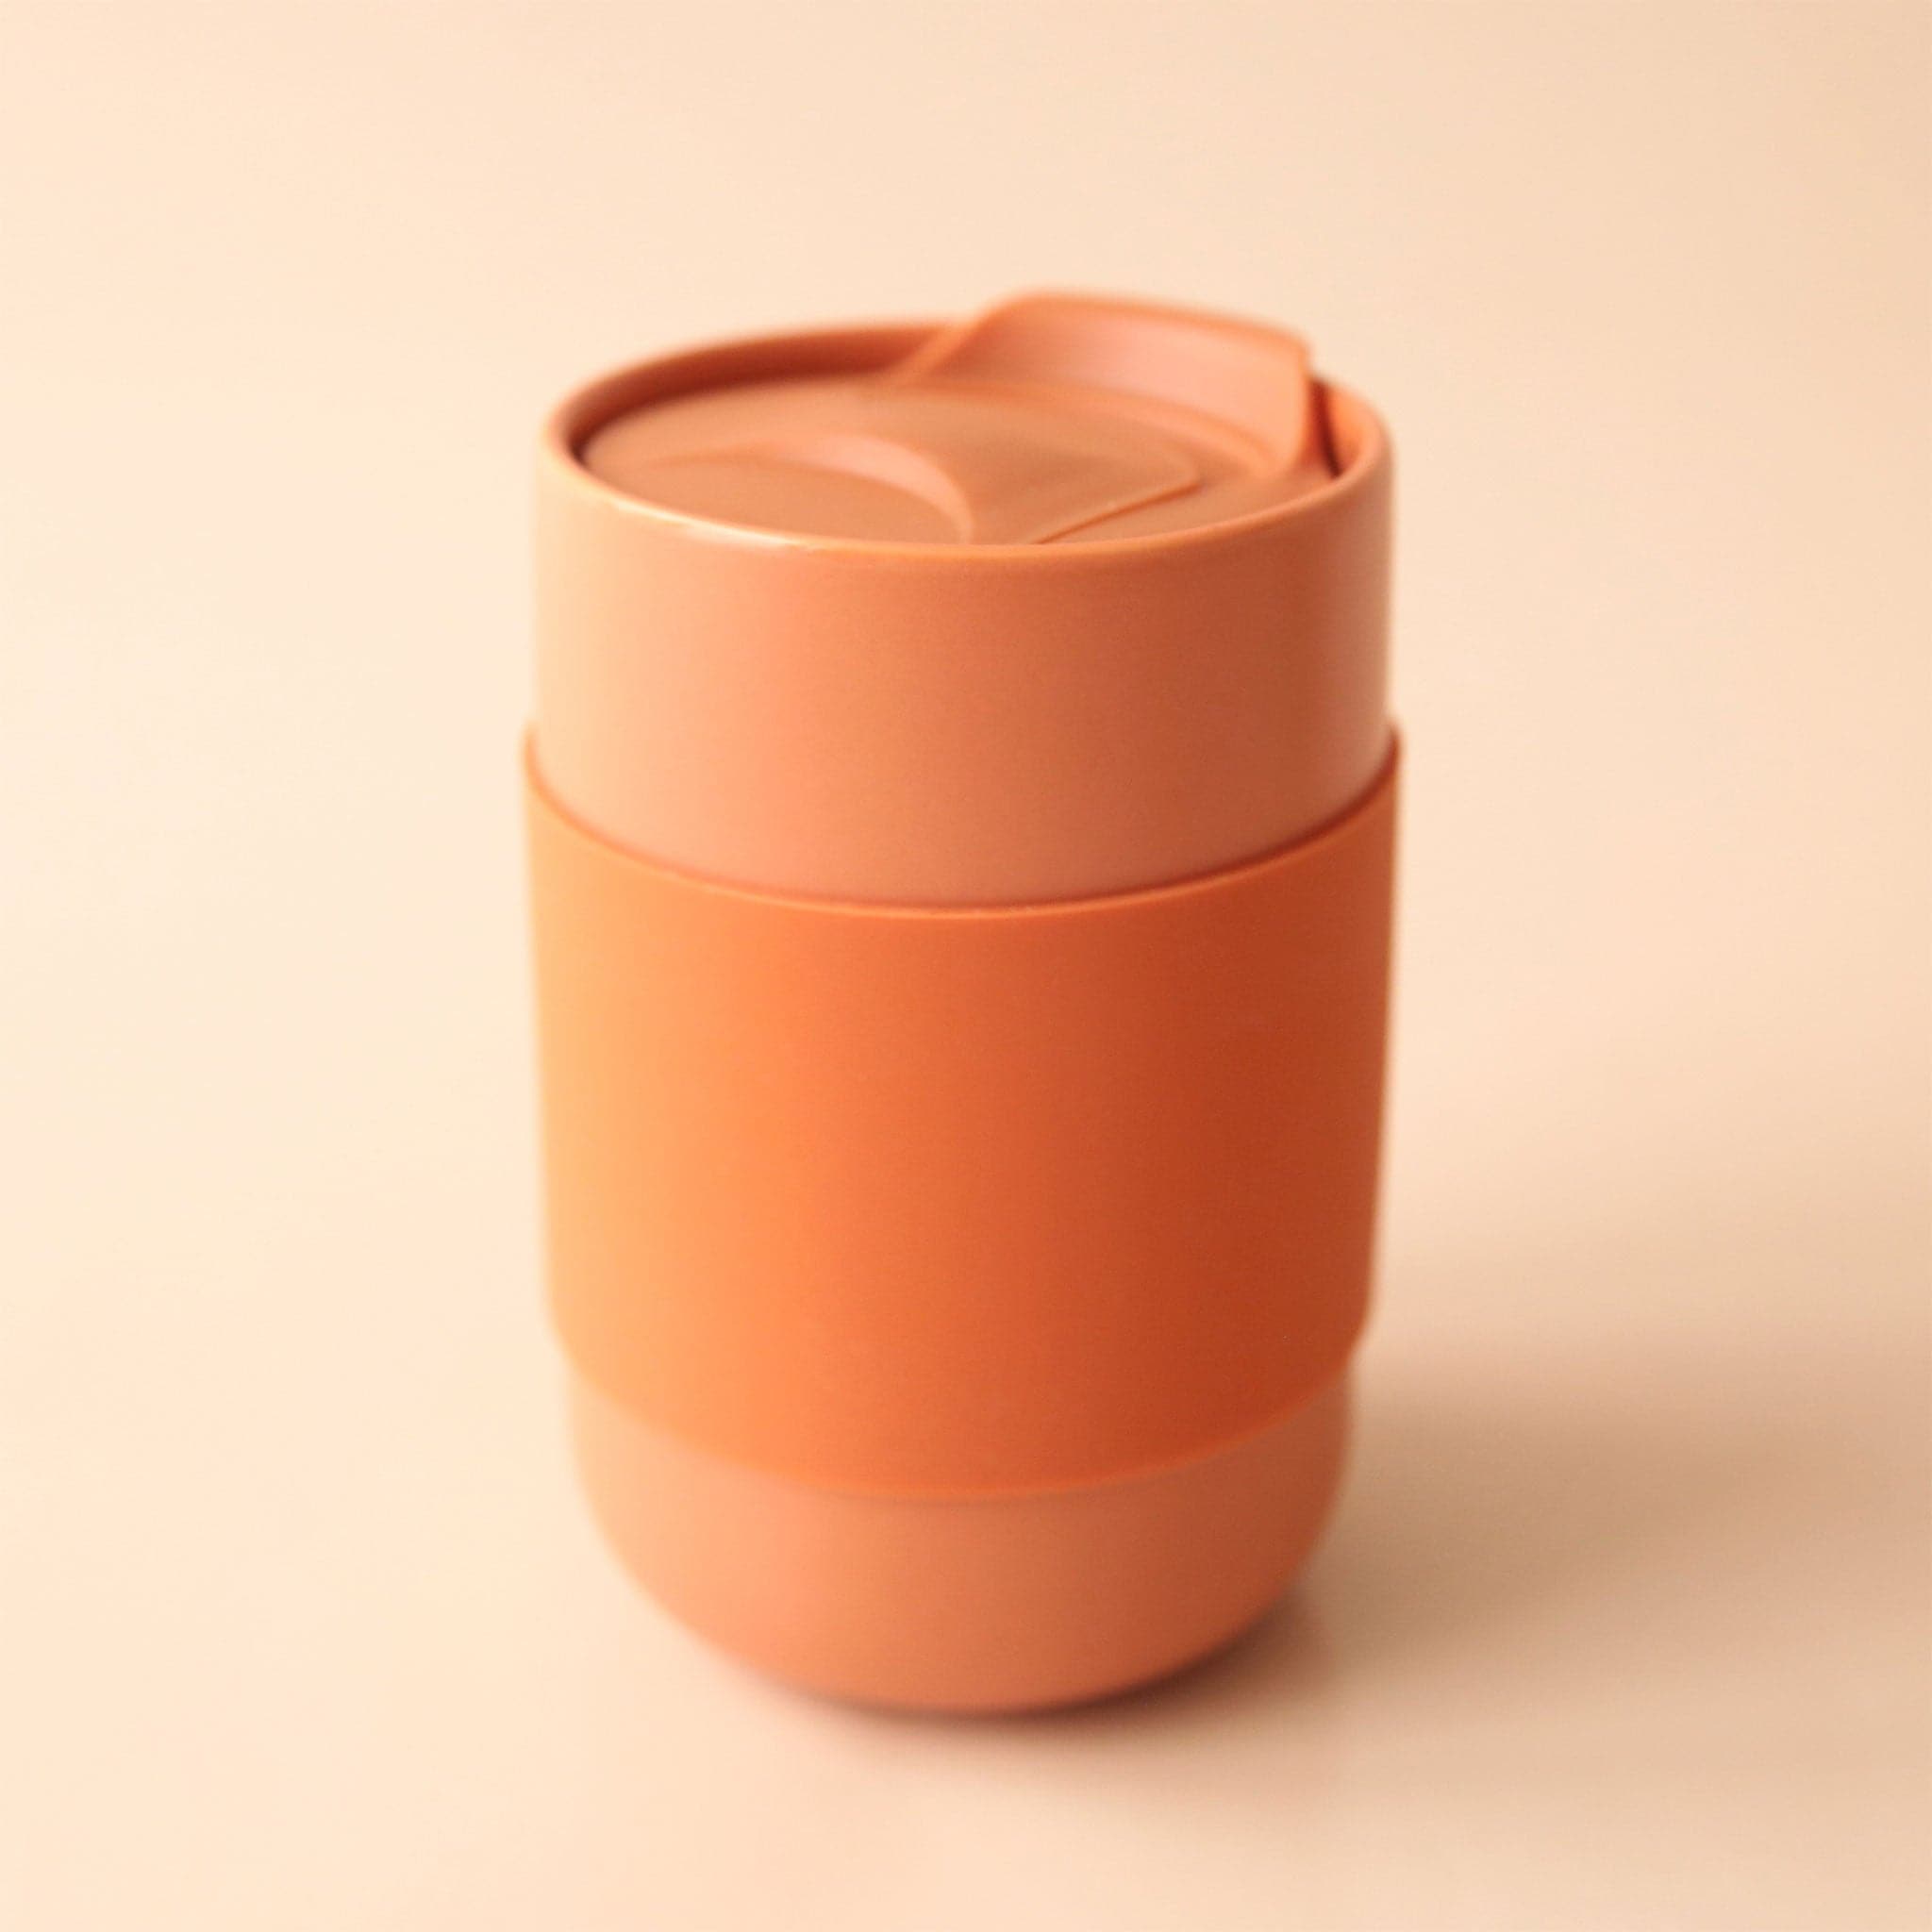 A terracotta travel cup made of dishwasher safe ceramic along with a removable silicone sleeve.